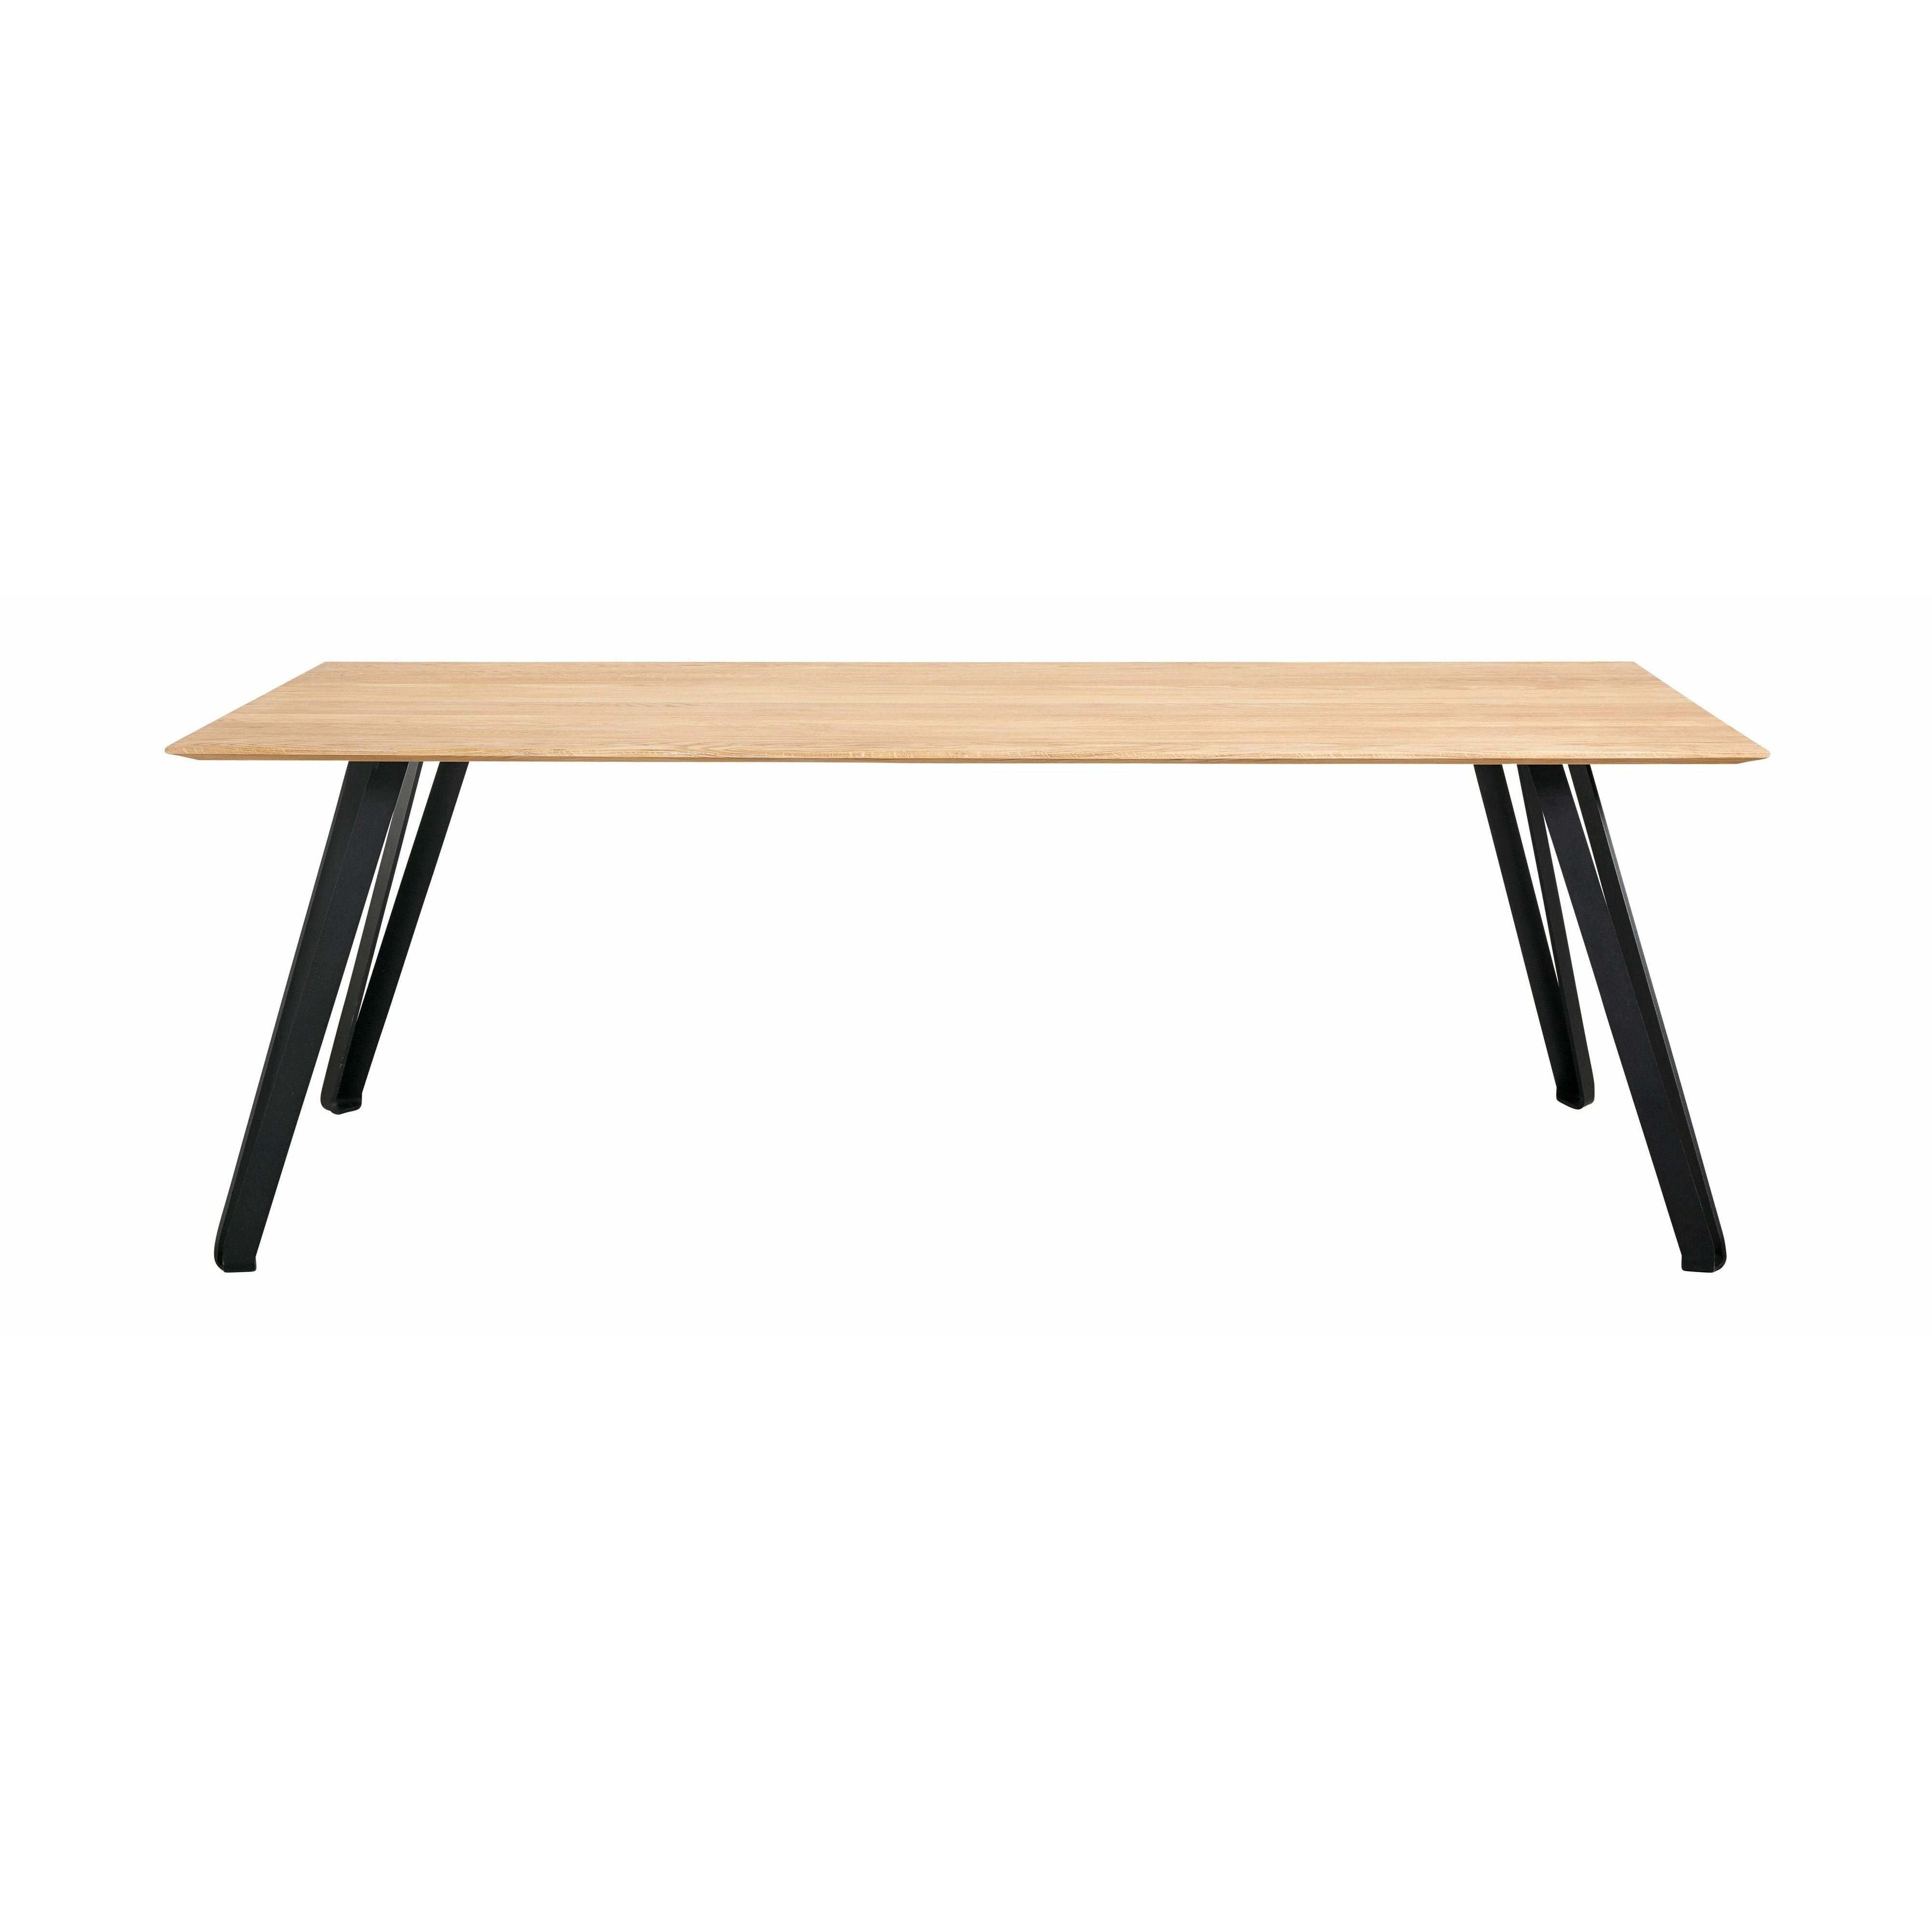 Muubs Space Dining Table Oak, 220cm